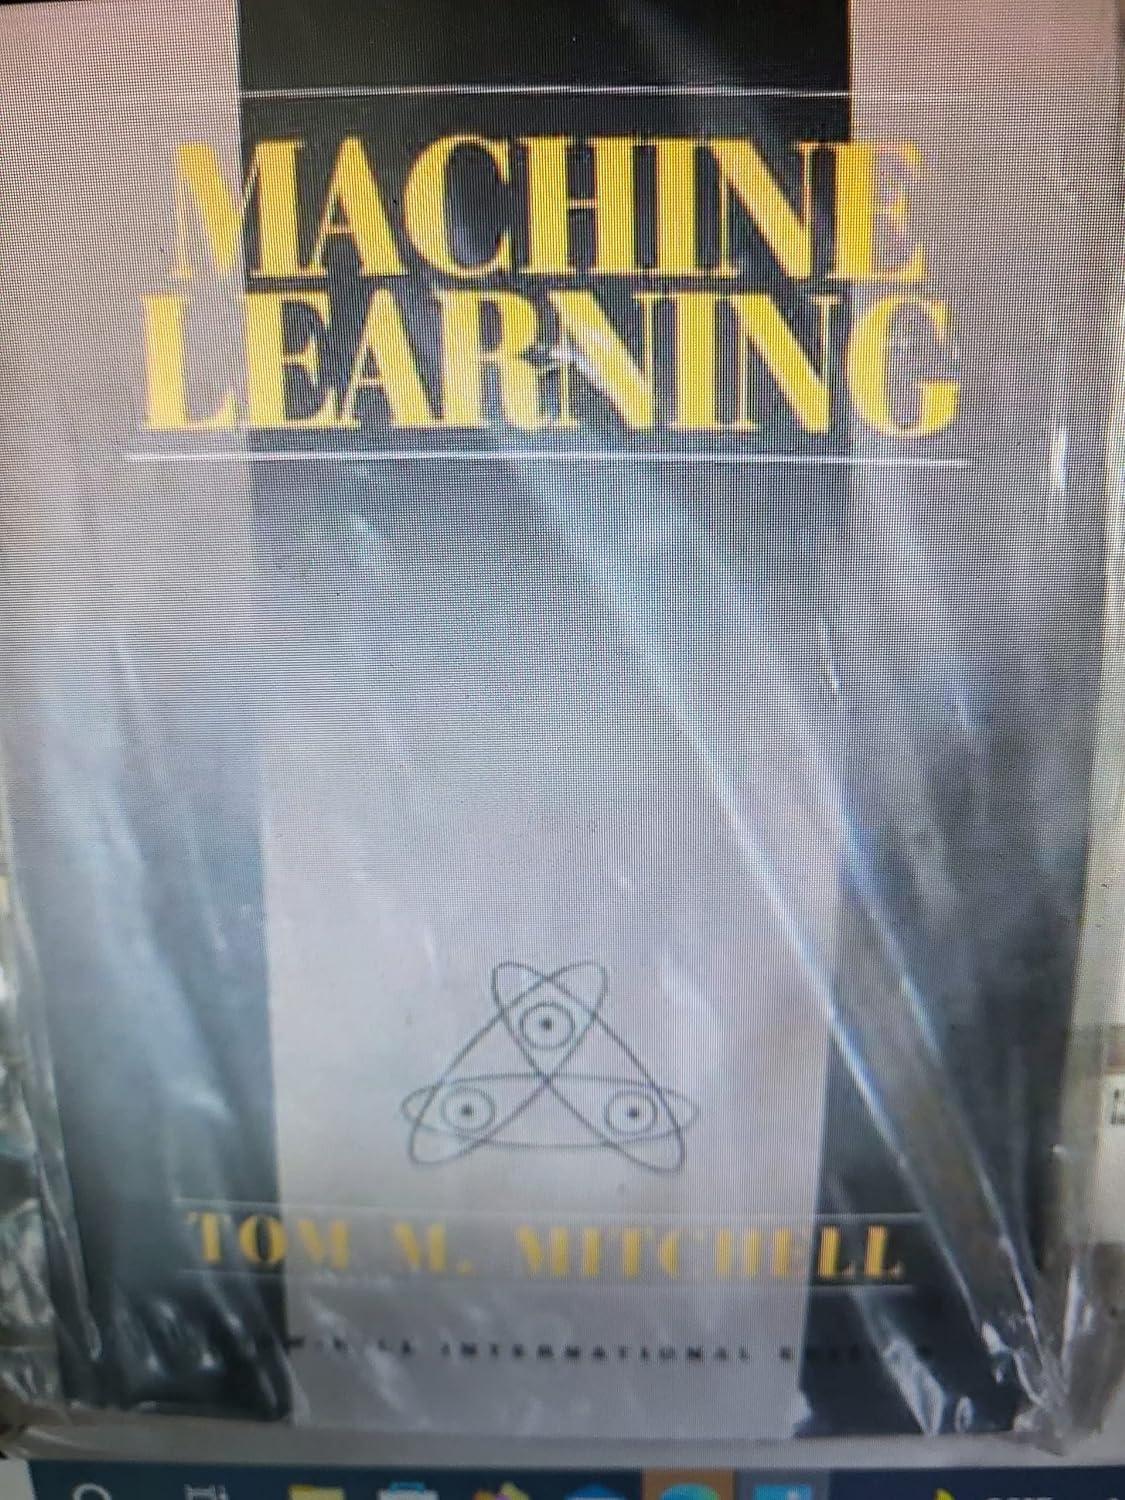 machine learning 1st edition tom m. mitchell 0071154671, 978-0071154673